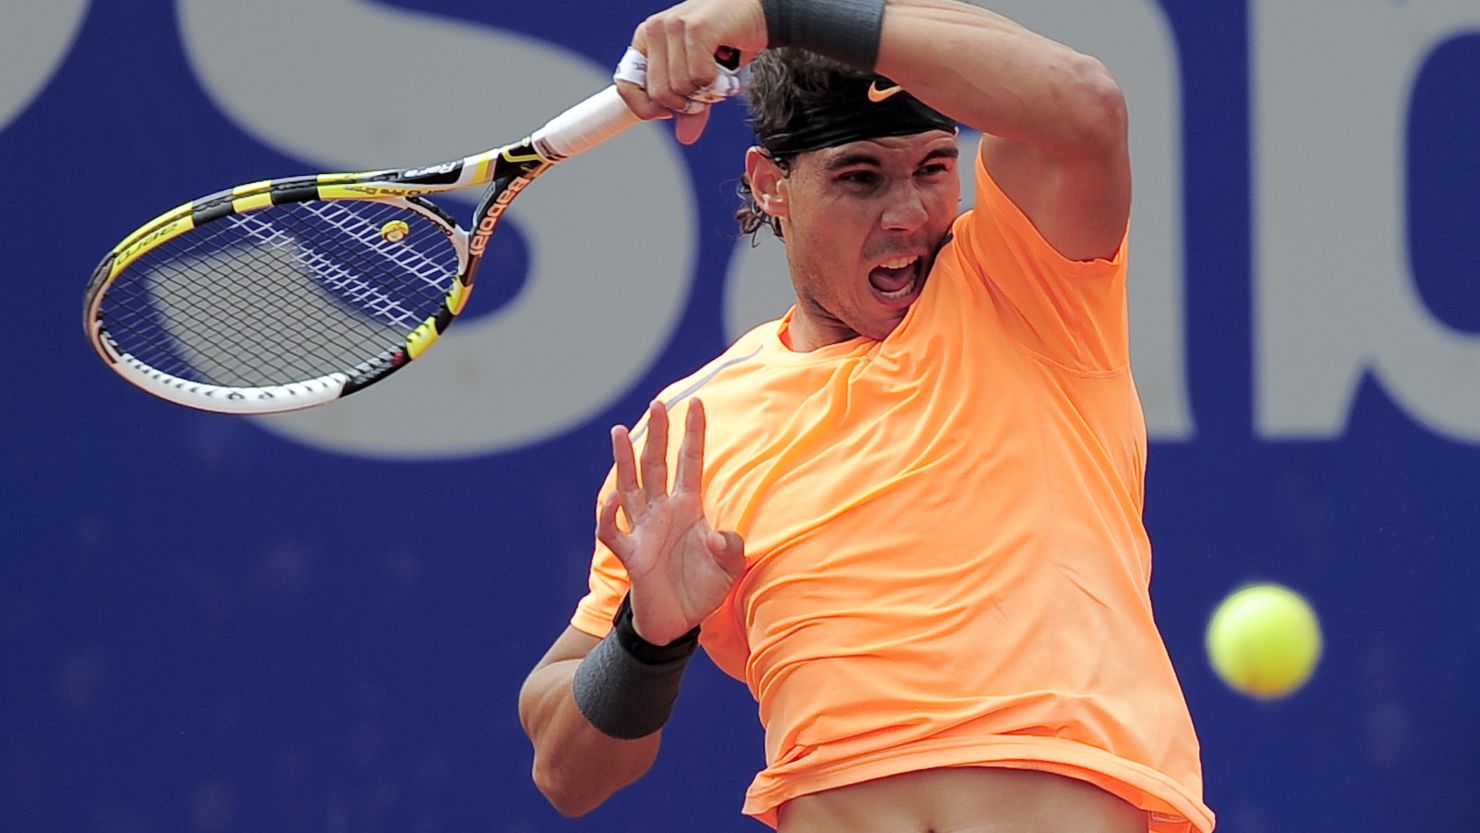 Rafael Nadal powered past his compatriot Fernando Verdasco on Saturday in the semifinals of the ATP event in Barcelona